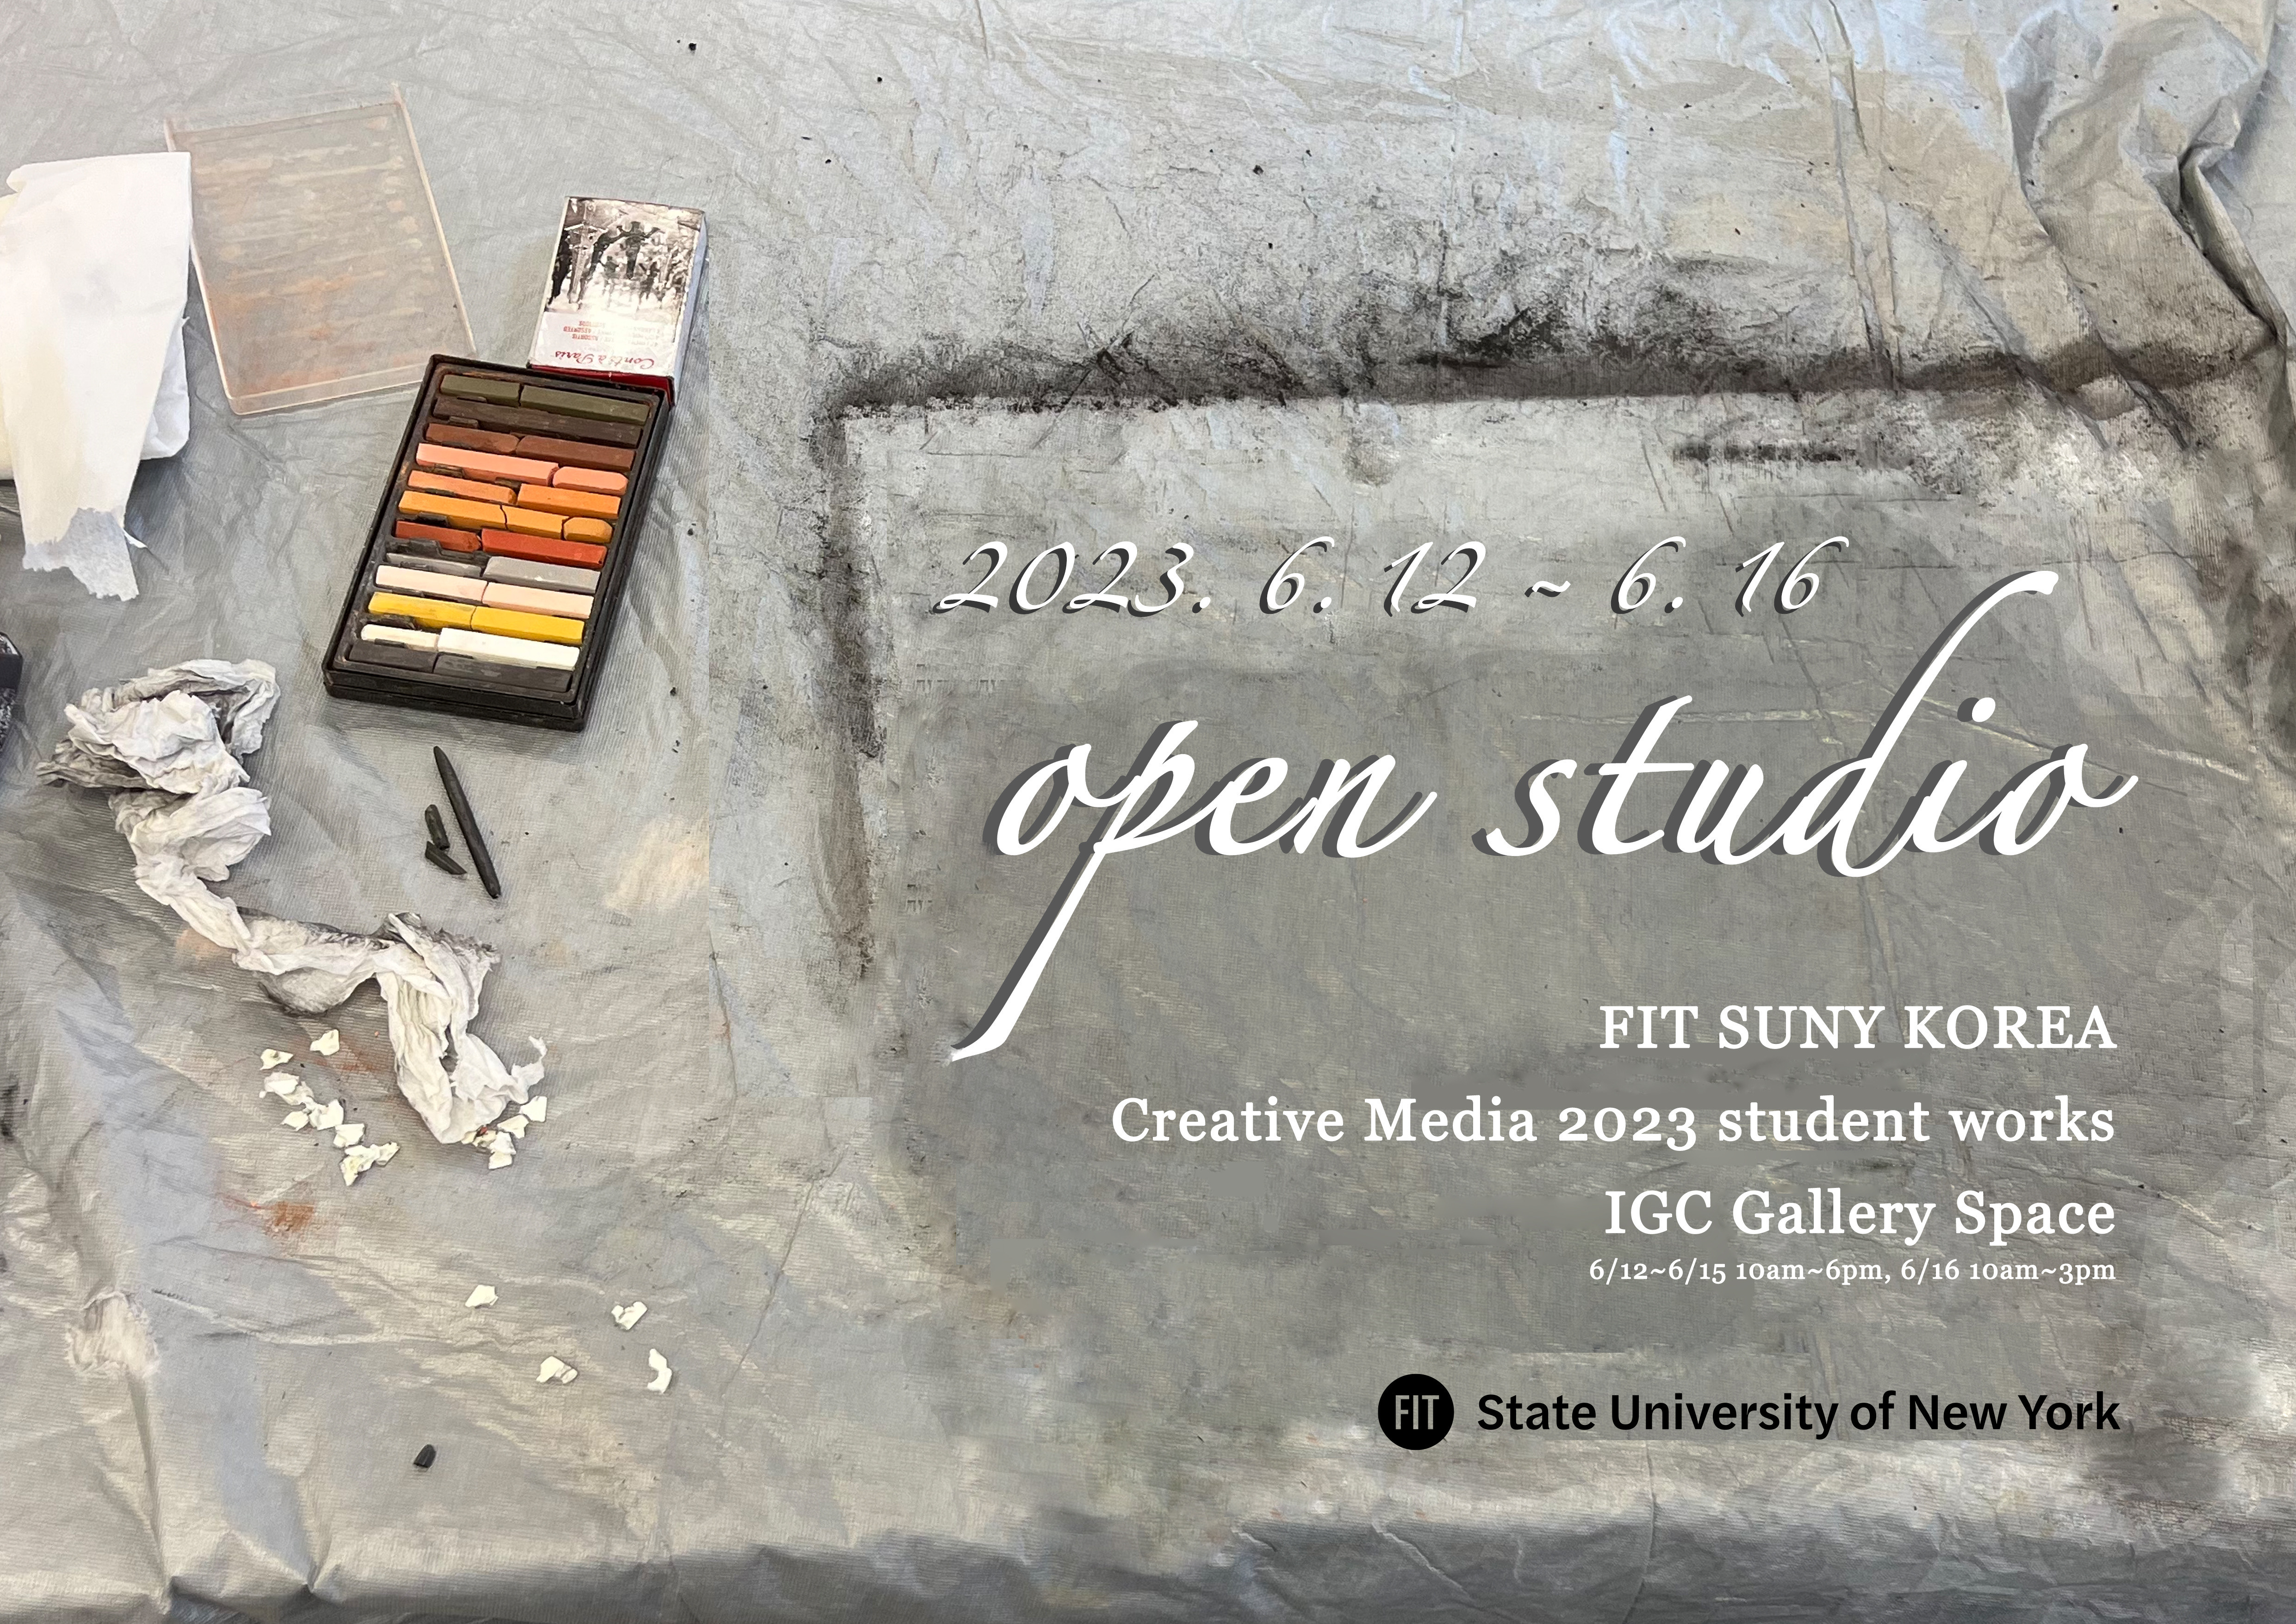 2023.6.12~6.16 apen studia FIT SUNY KOREA Creative Media 2023 student works IGC Gallery Space 6/12~6/15 10am~6pm, 6/16 10am~3pm. FIT State University of New York